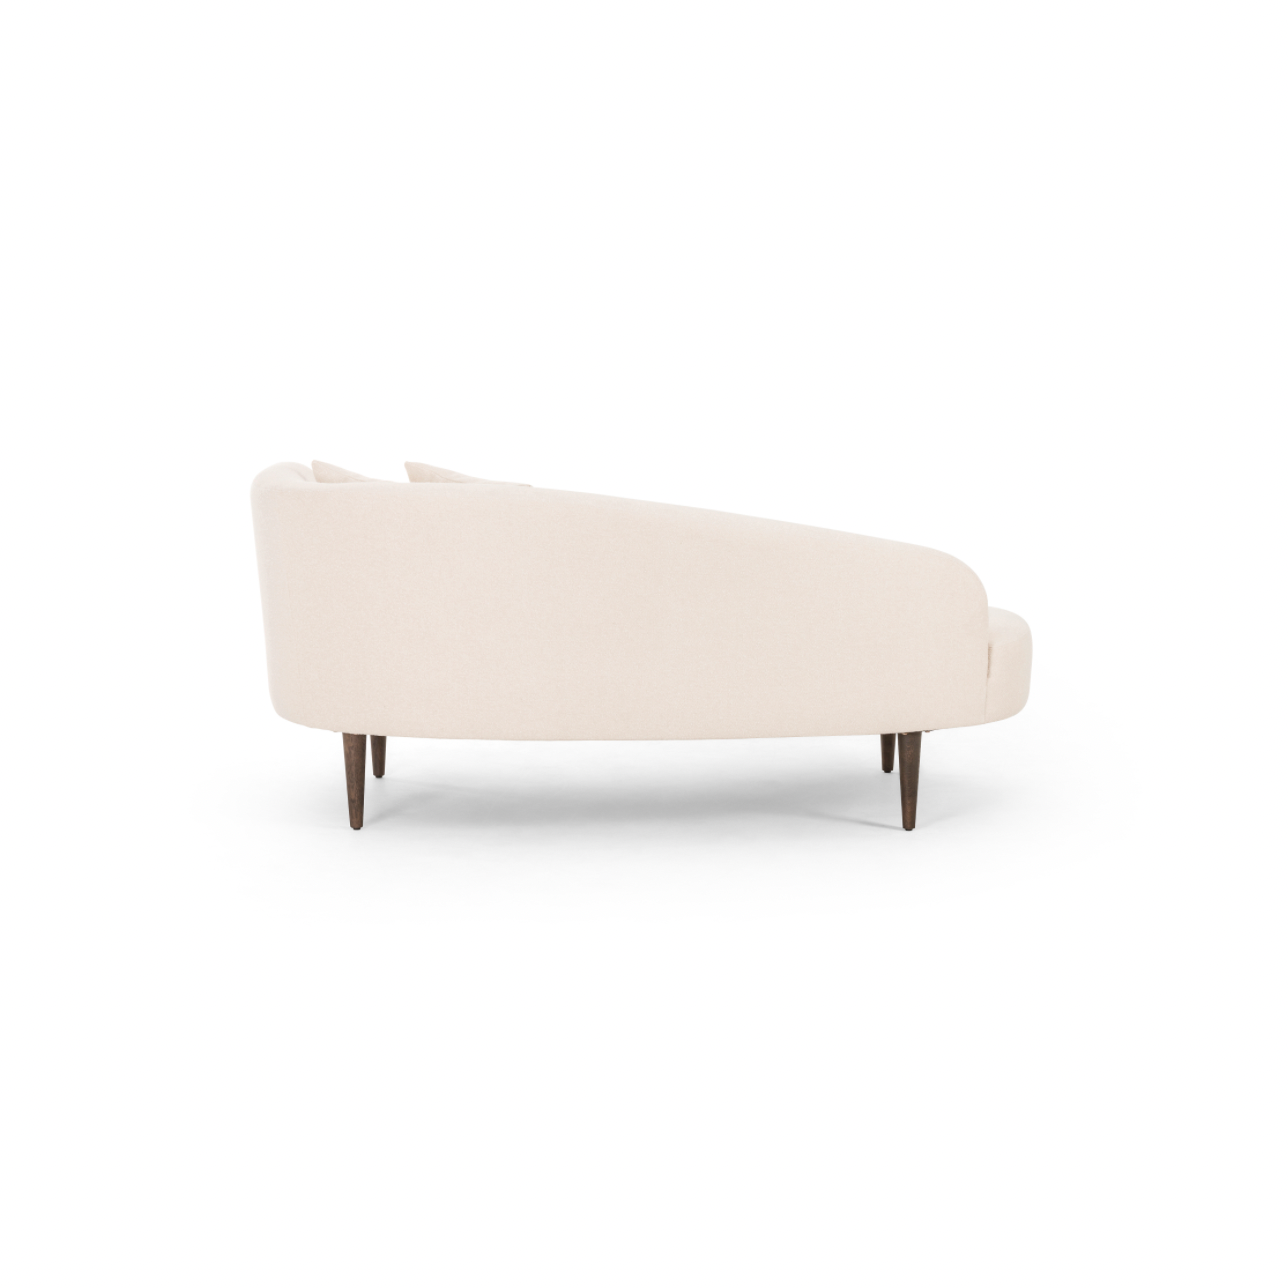 This curvy, Italian-inspired Luna Chaise exudes attitude. This features exclusive performance-grade ivory boucle in a striking, sultry S shape. Dual pillows for a fine finishing touch for any bedroom, office, or living room.  Overall Dimensions: 70.00"w x 35.00"d x 30.00"h